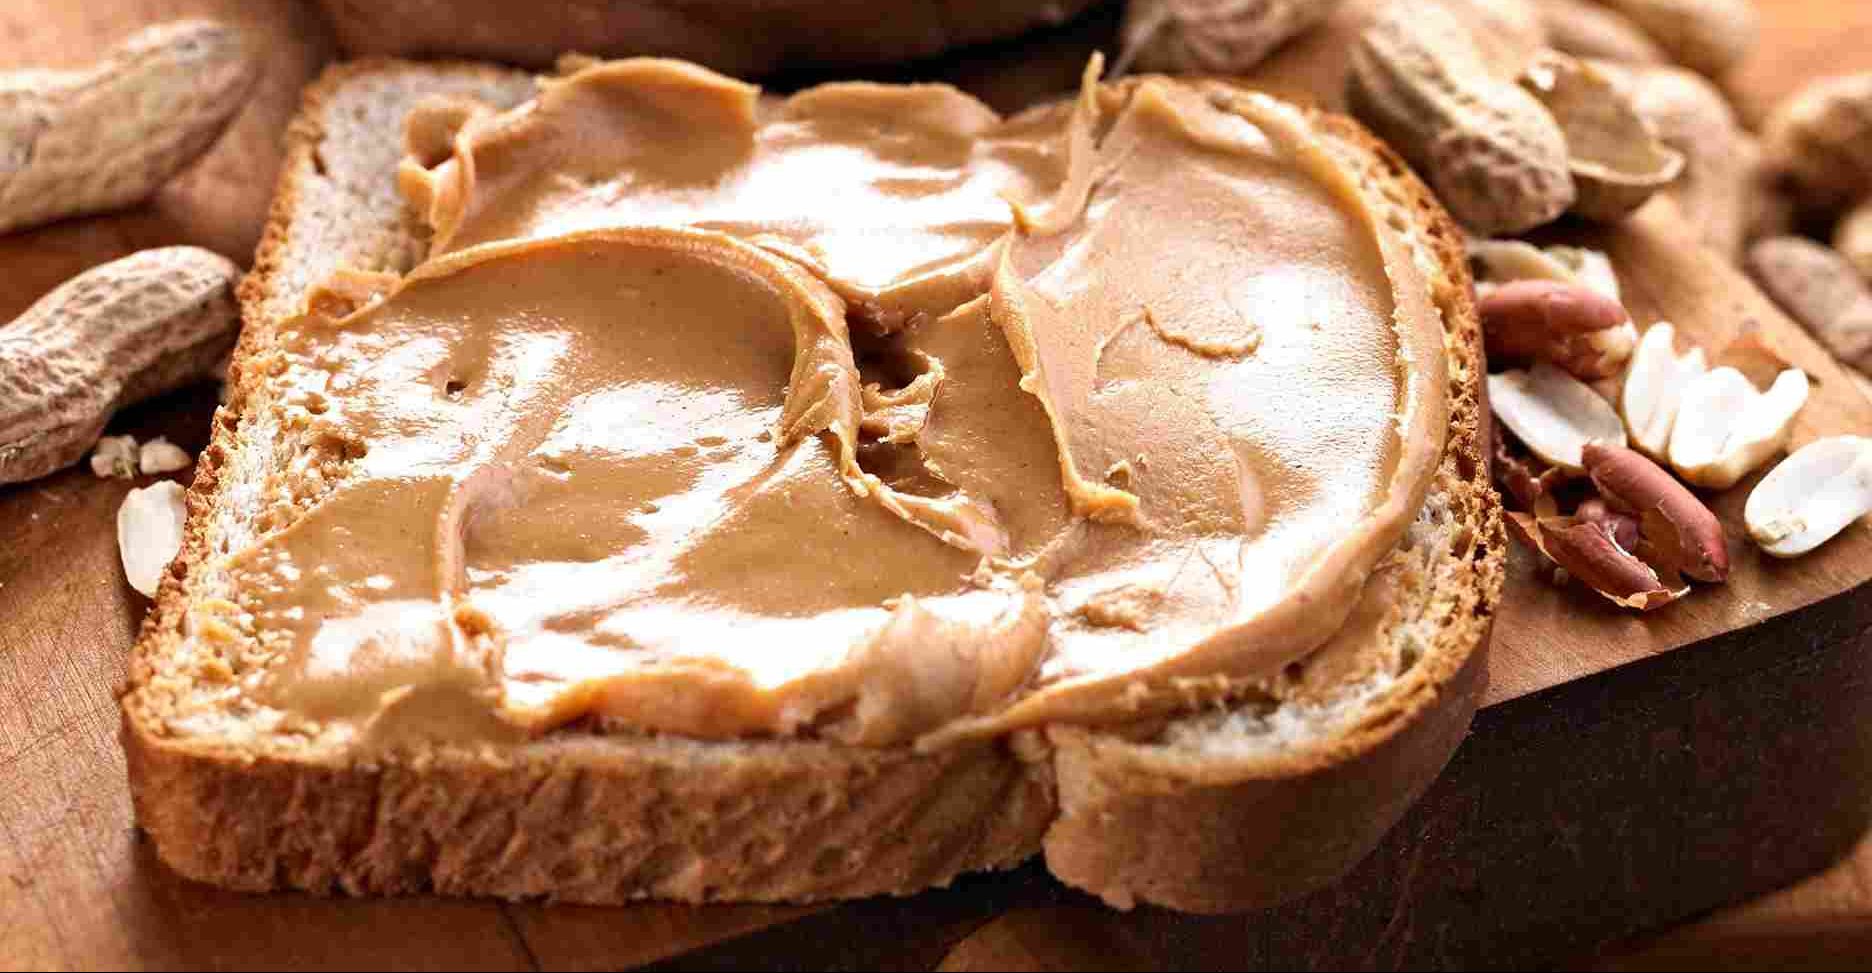 What peanut butter is healthy